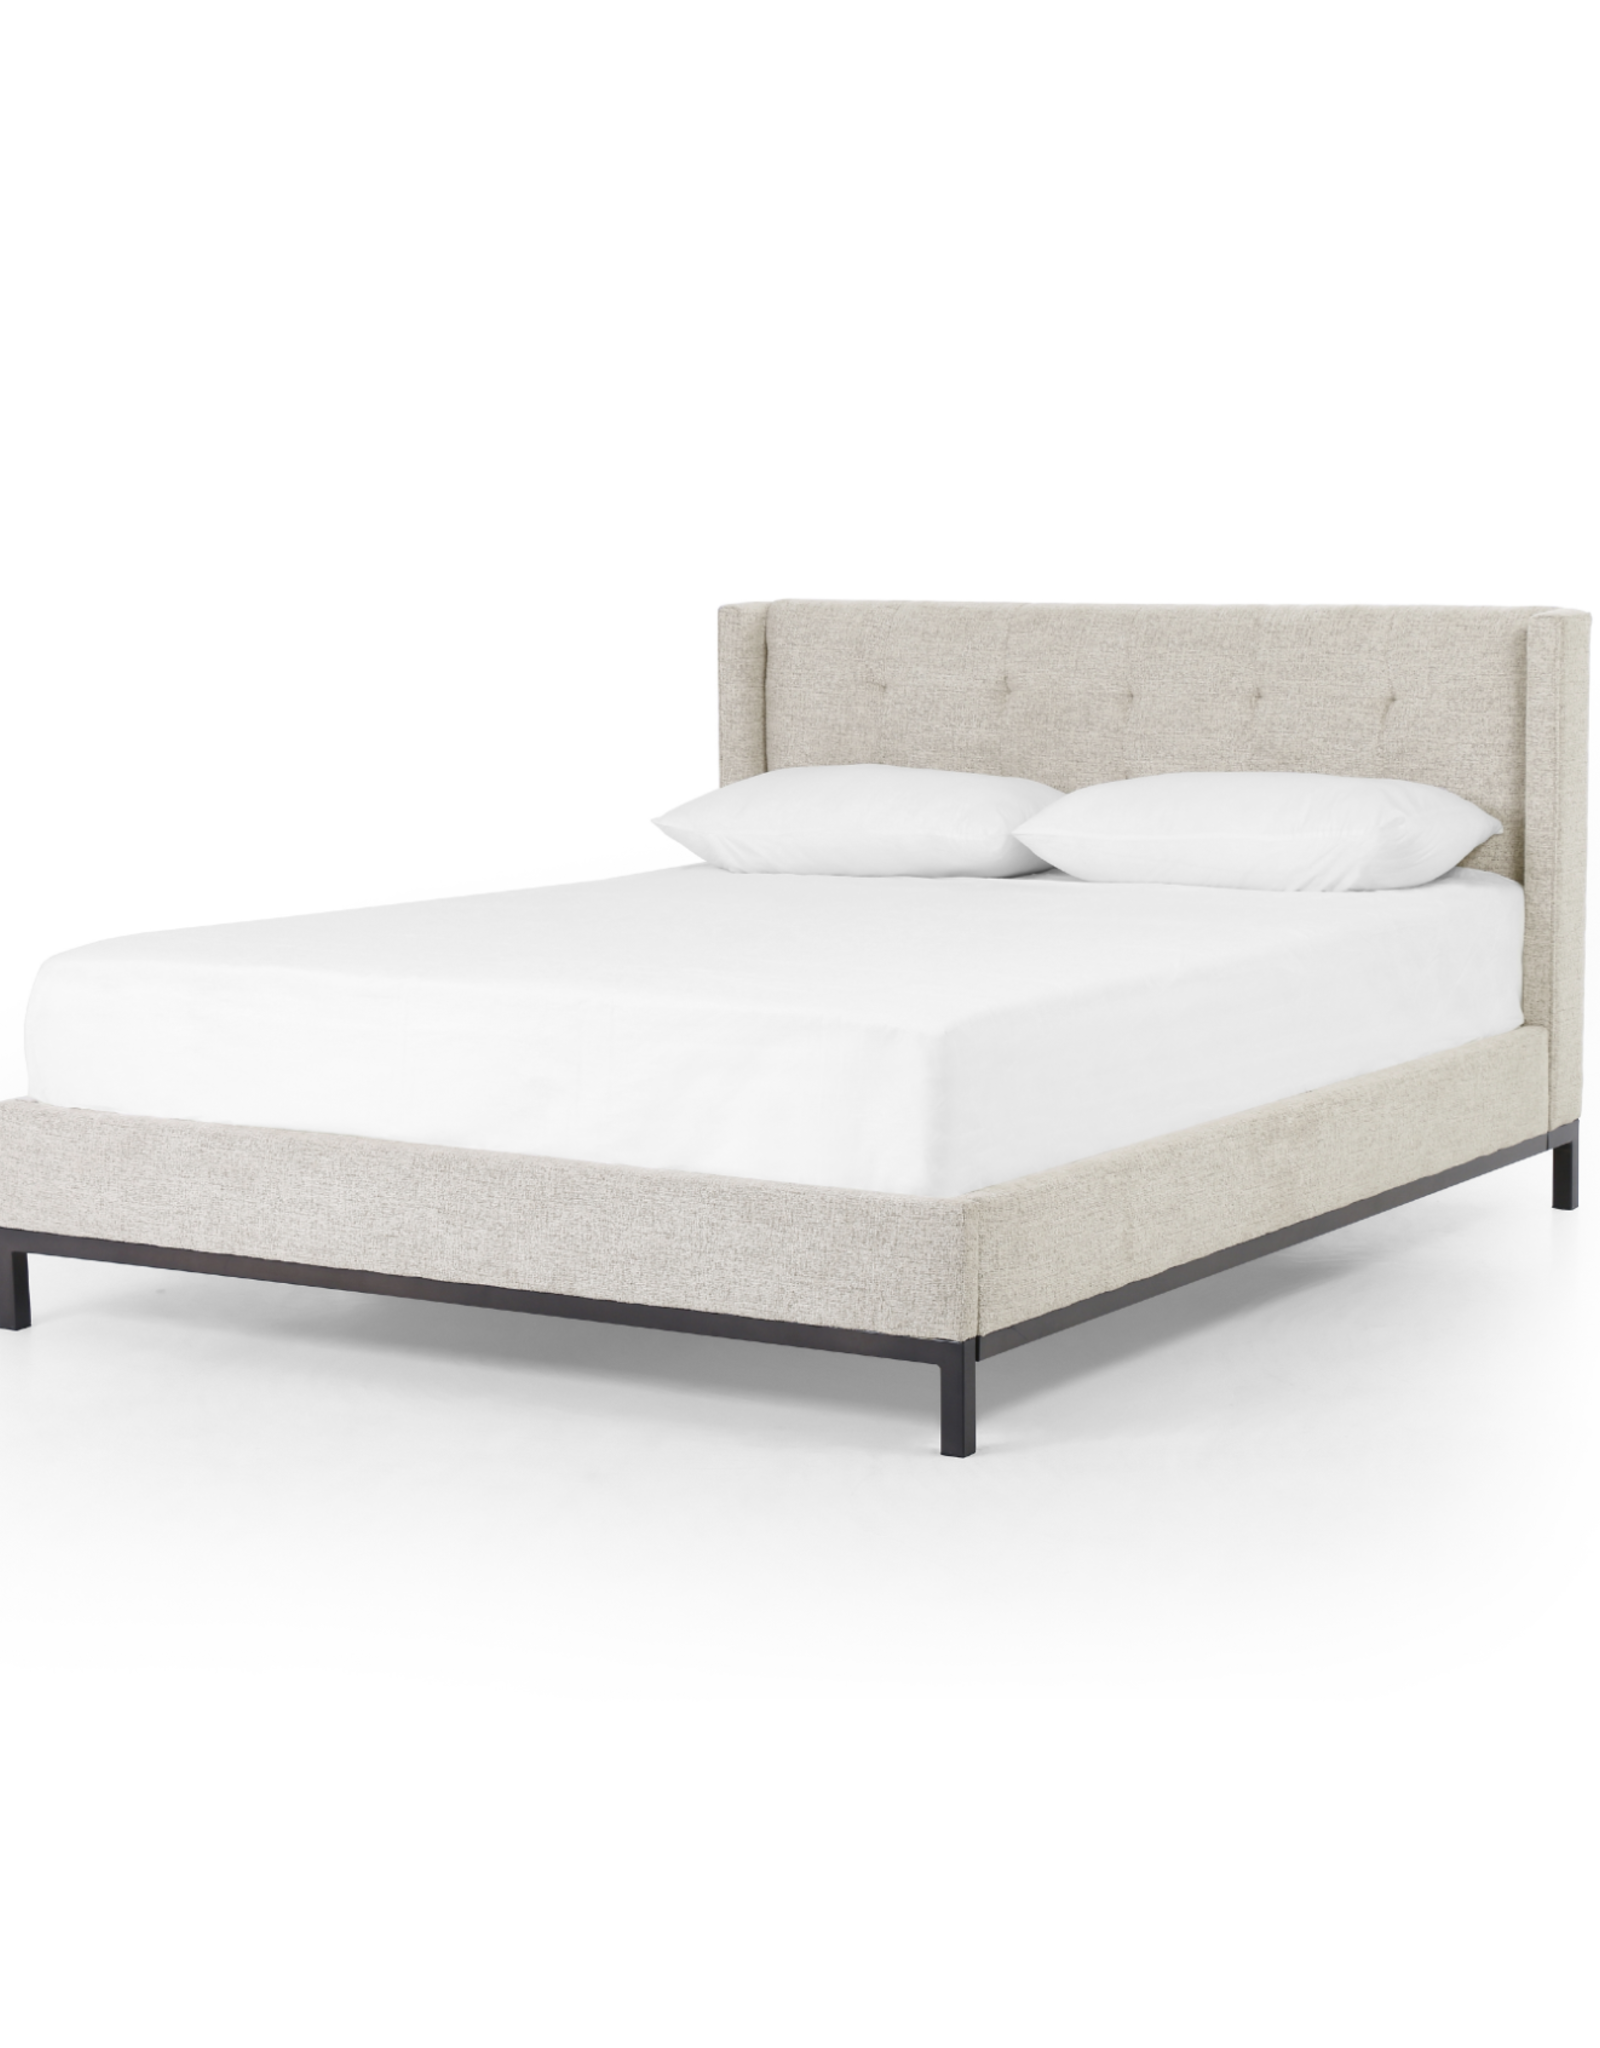 Newhall Bed in Plushtone Linen - Queen